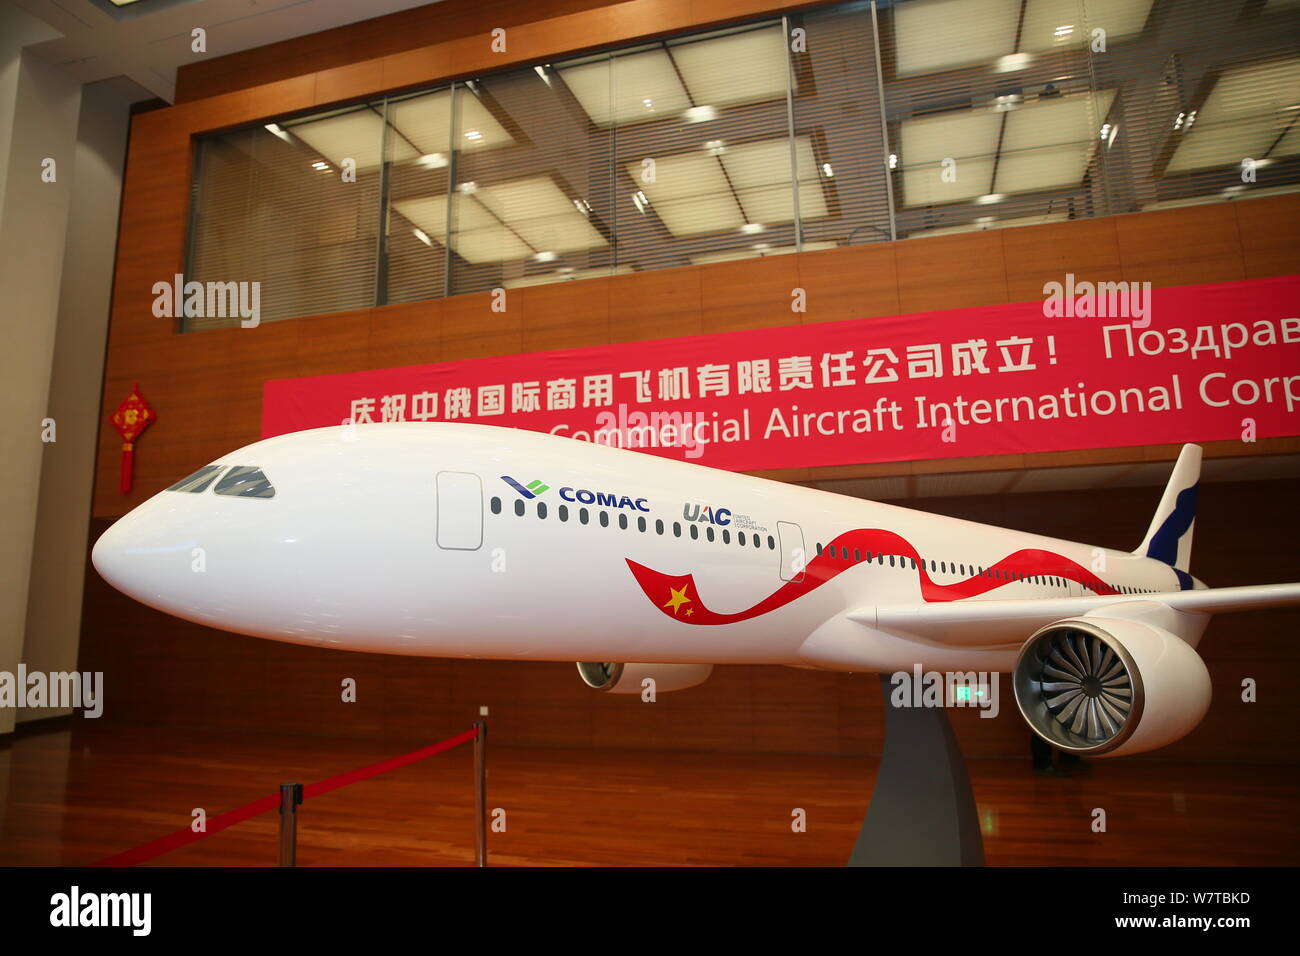 A model of a wide-body passenger jet is on display at the inauguration ceremony of the Shanghai-based China-Russia Commercial Aircraft International C Stock Photo